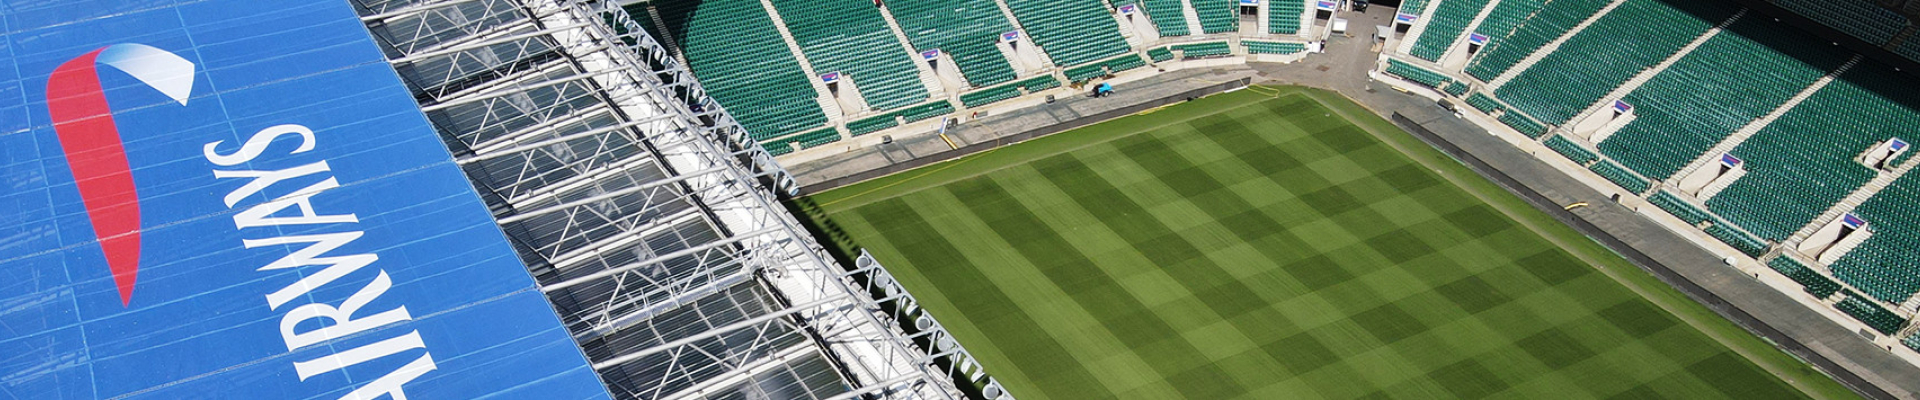 Pearce designed, engineering and installed two 2,254 sqm banners for British Airways at Twickenham.